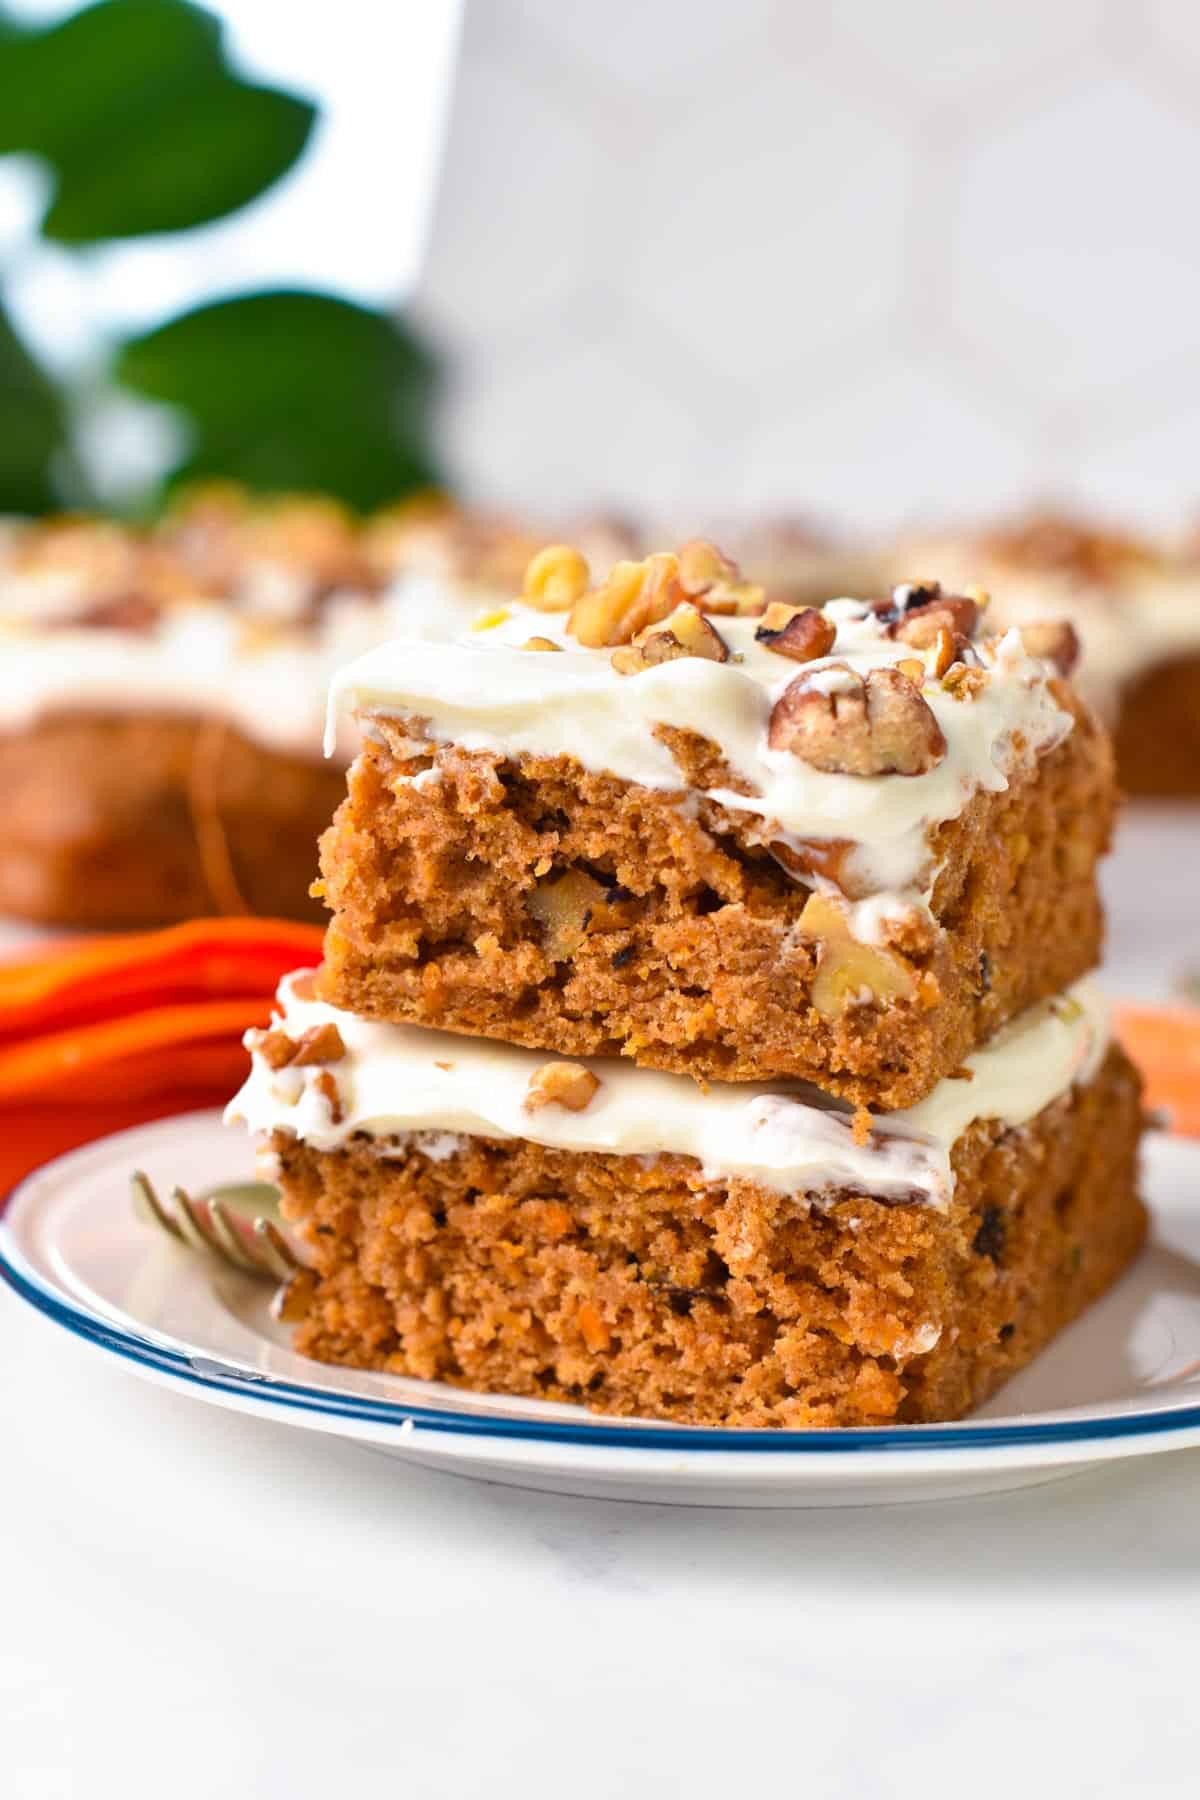 Two slices of sheet pan carrot cake, frosted, and stacked on a plate with in the background a carrot cake and green plant.